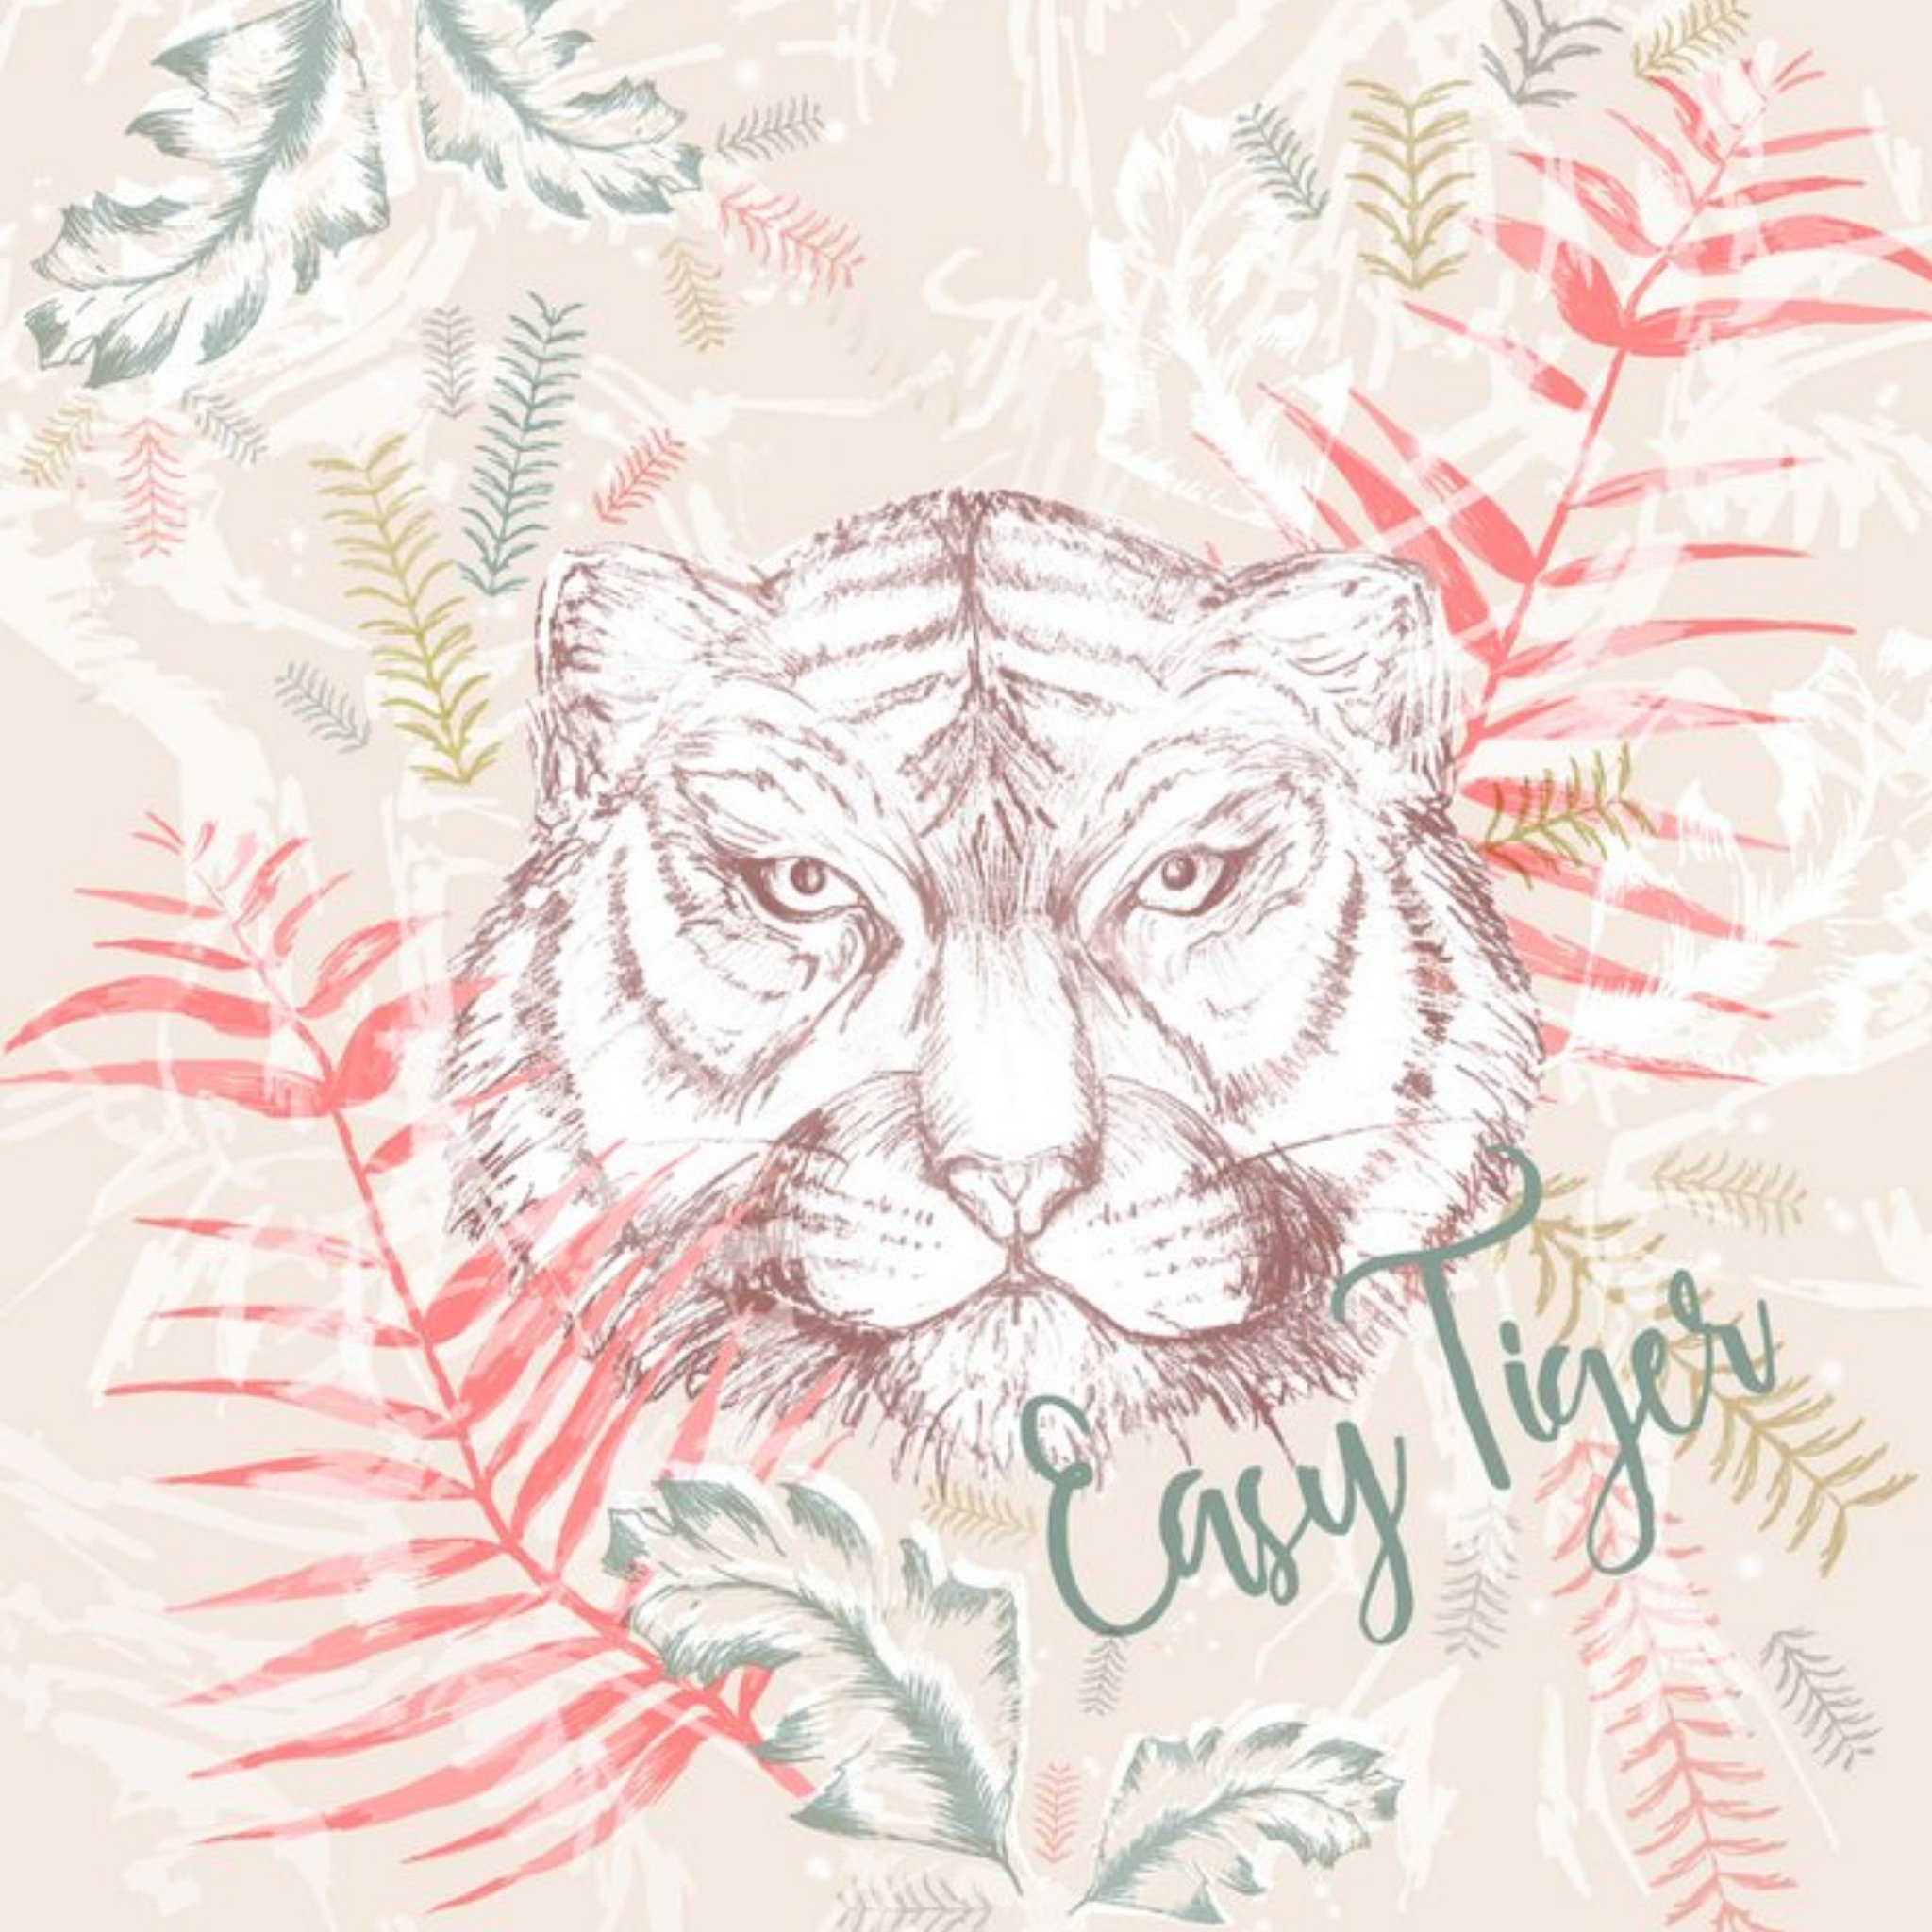 Other Birthday Card - Just A Note - Easy Tiger - Art Card, Large